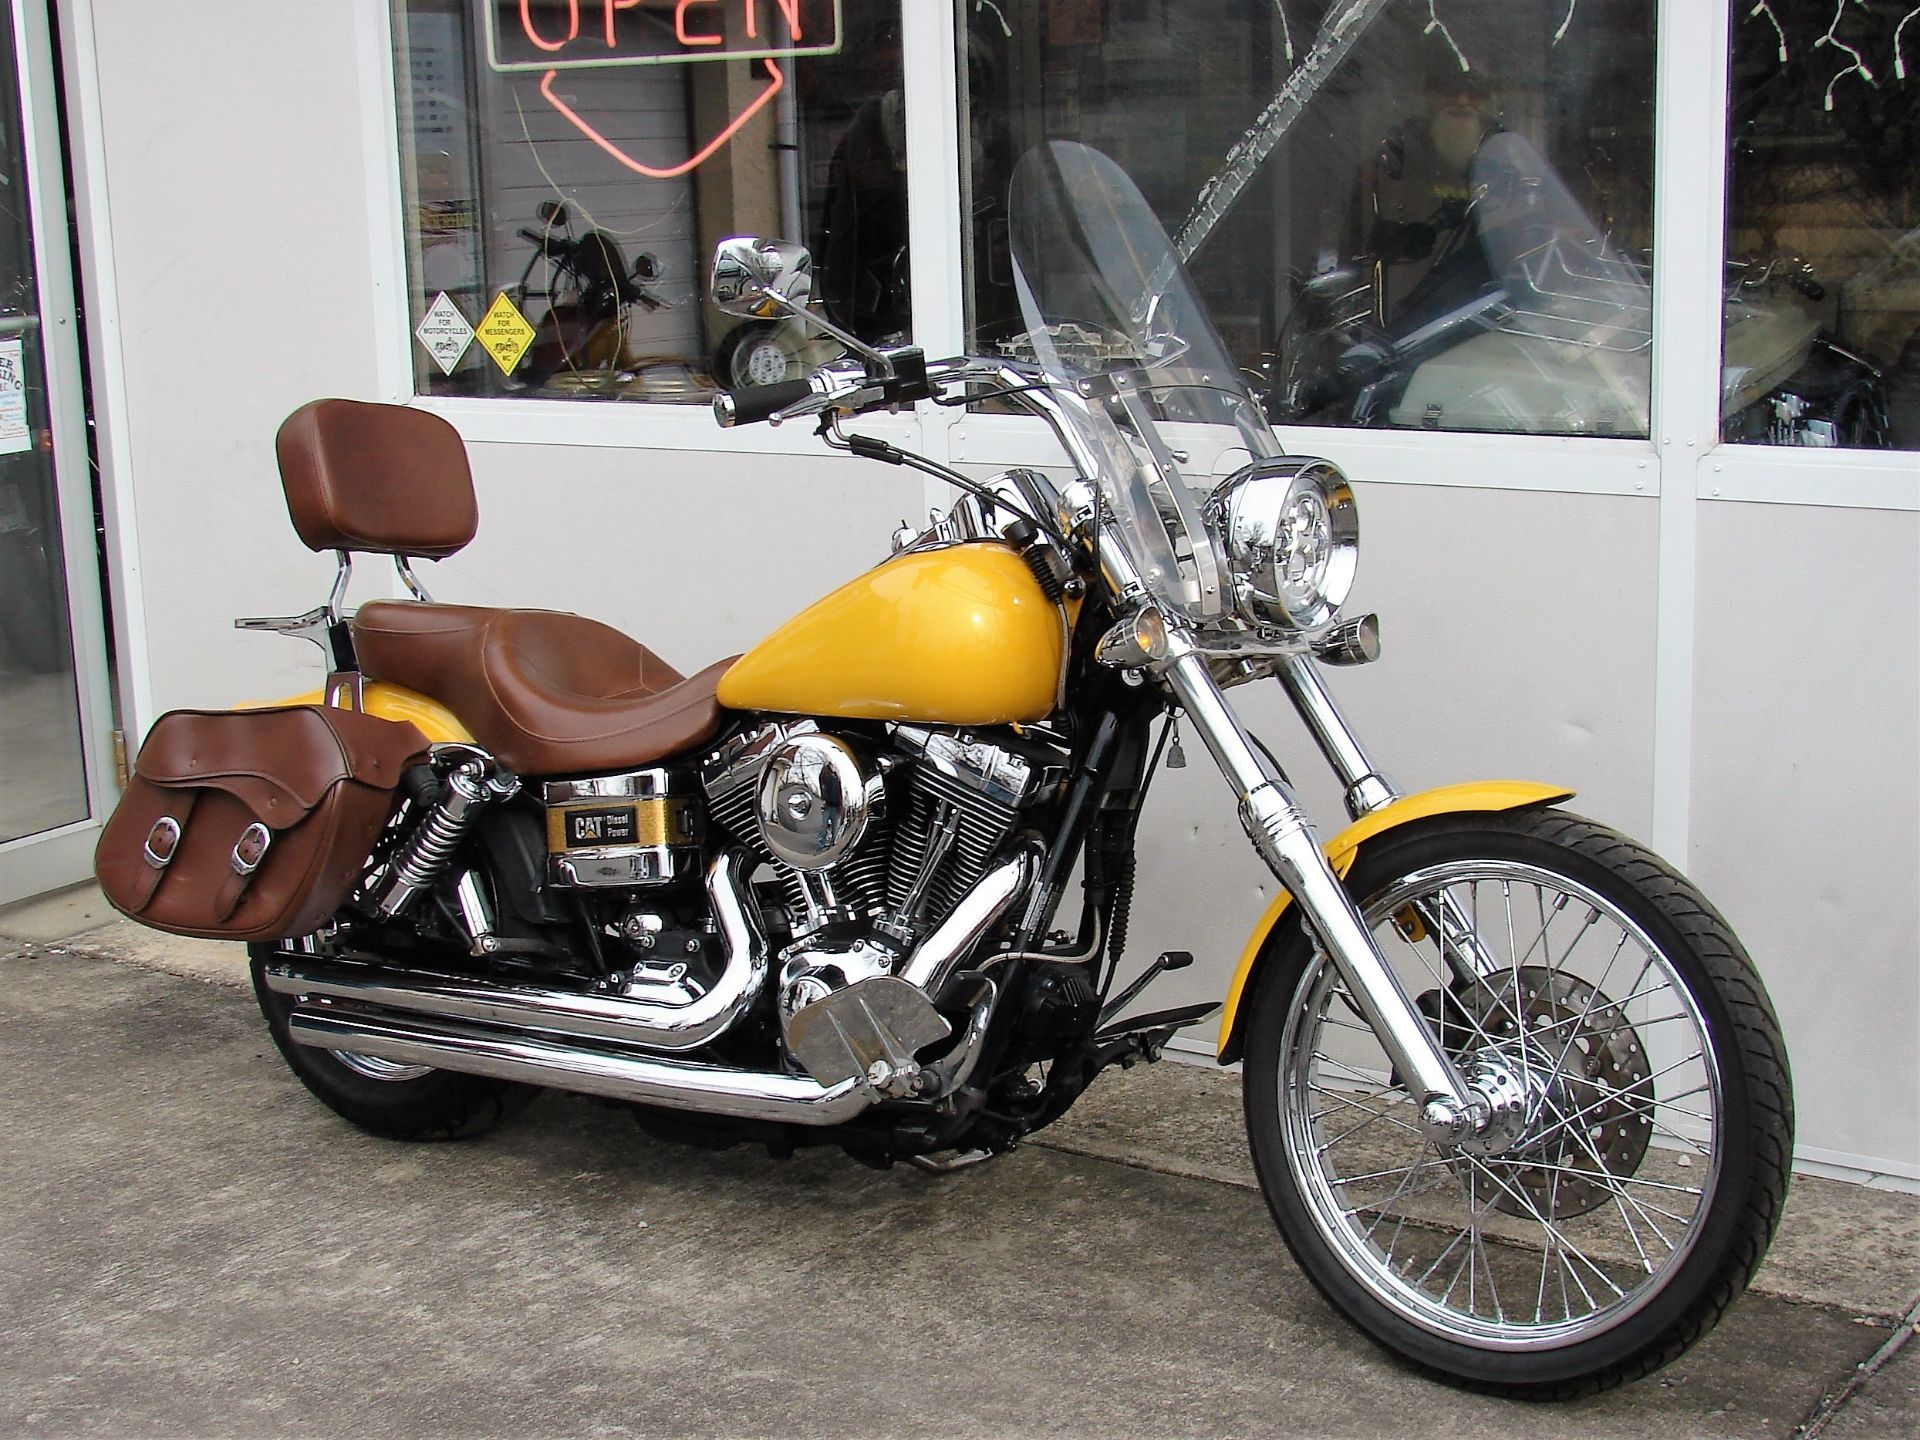 2007 Harley-Davidson FXDWG Dyna Wide Glide in Williamstown, New Jersey - Photo 4